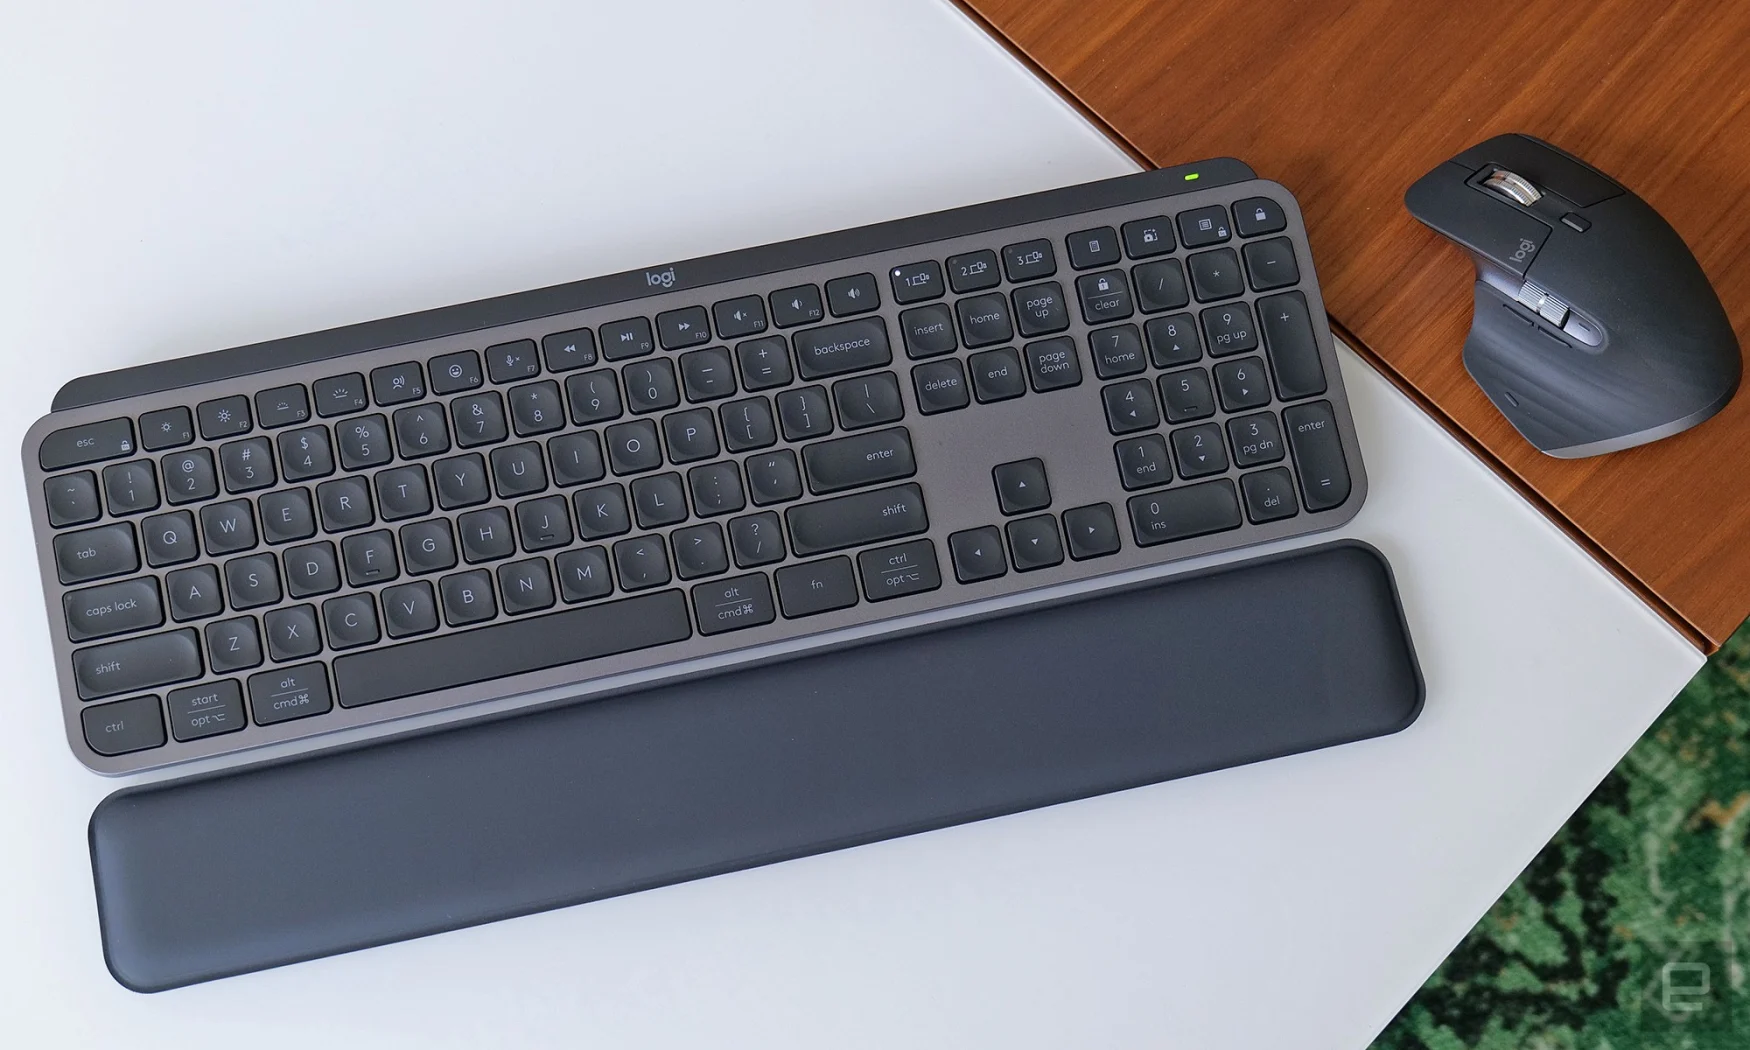 The new MX Keys S combo bundle includes the keyboard, and MX Master 3S mouse and the MX Wrist Rest for $200 -- $30 less than what everything would cost if purchased separately. 